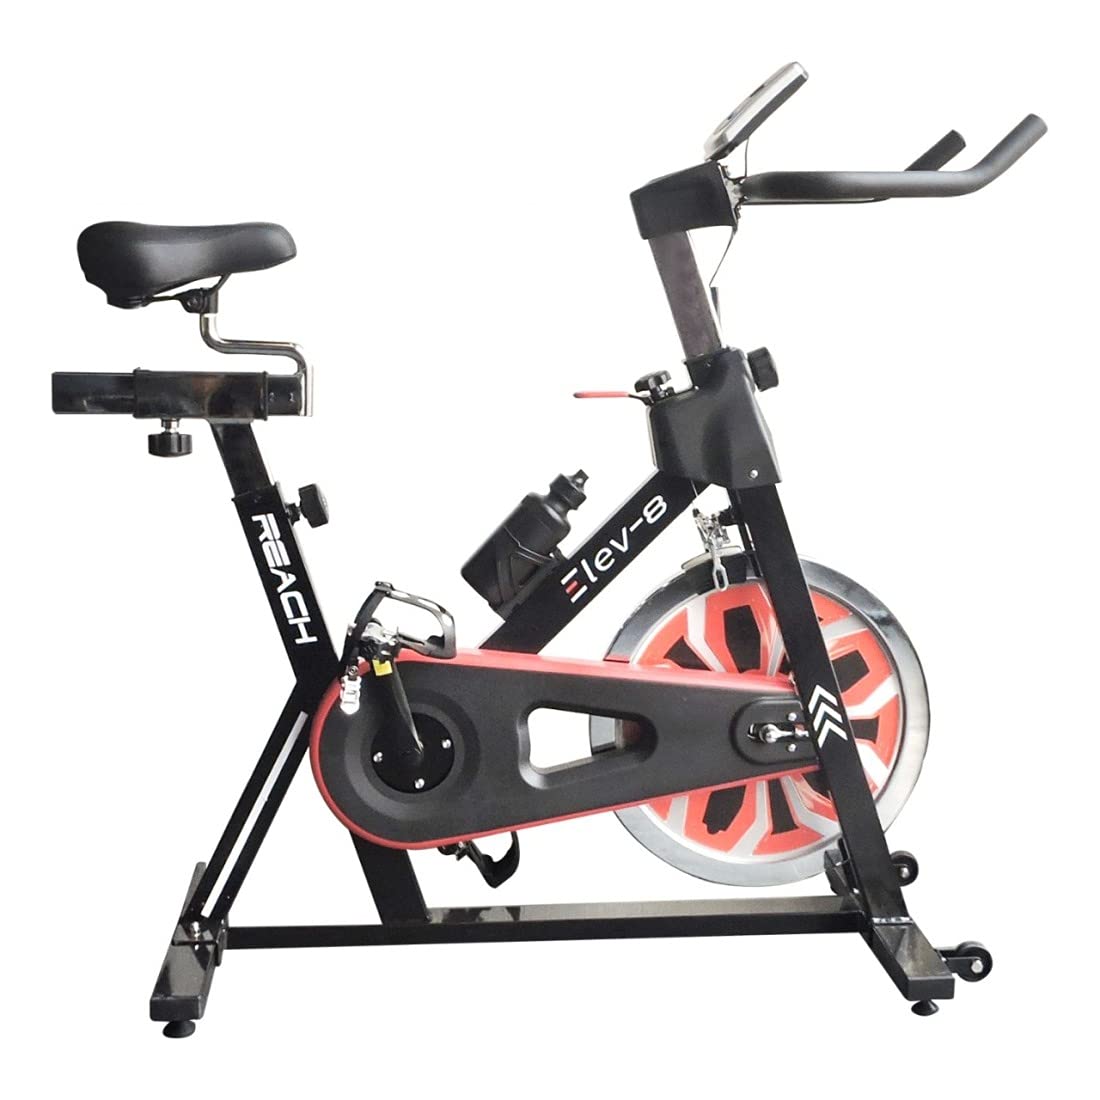 Reach Elev-8 Spin Bike for Home Gym Exercise Cycle with Ajustable Seat and Handle | Best at Home Gym Equipment for Fitness Training Wool Felt Resistance [18 kg Flywheel]